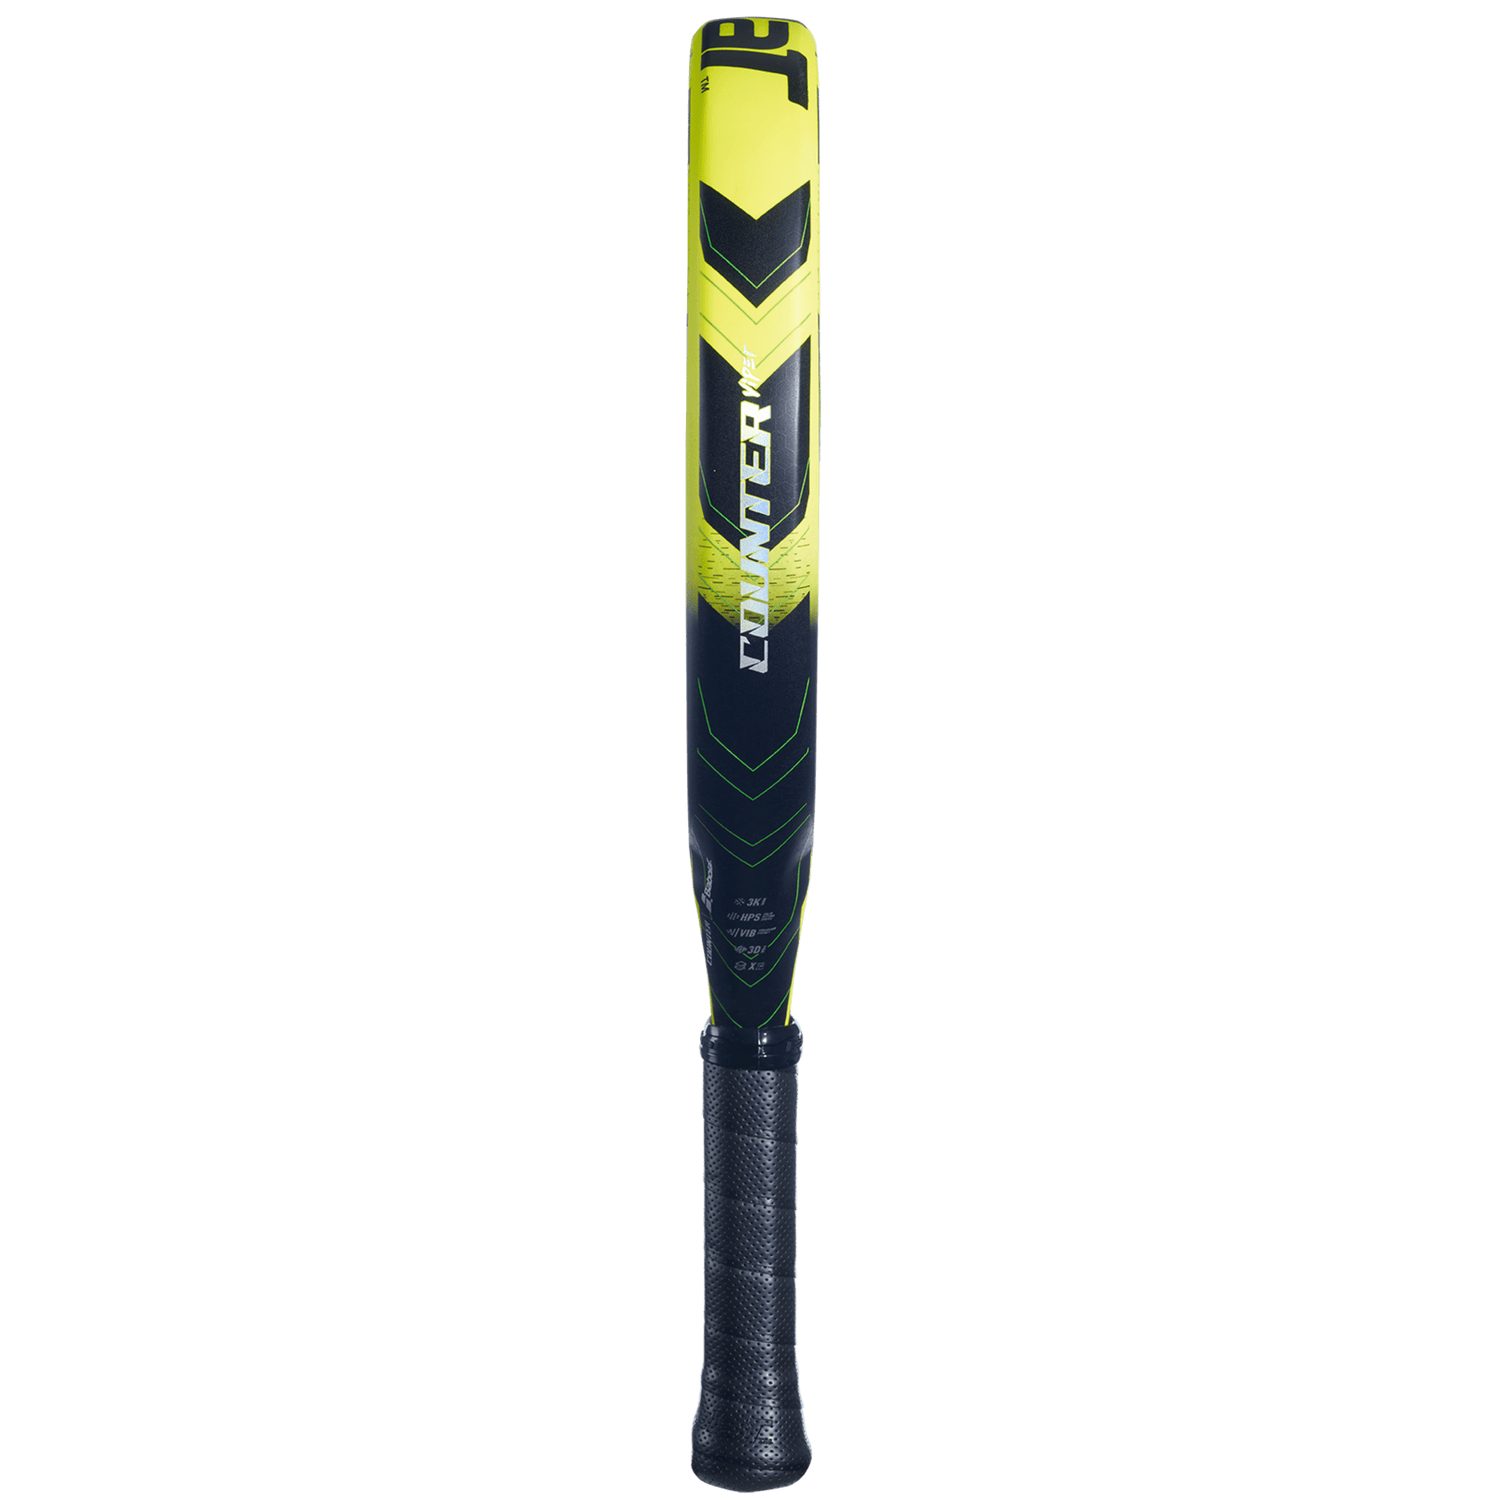 A padel racket with explosive power and a massive sweet spot.